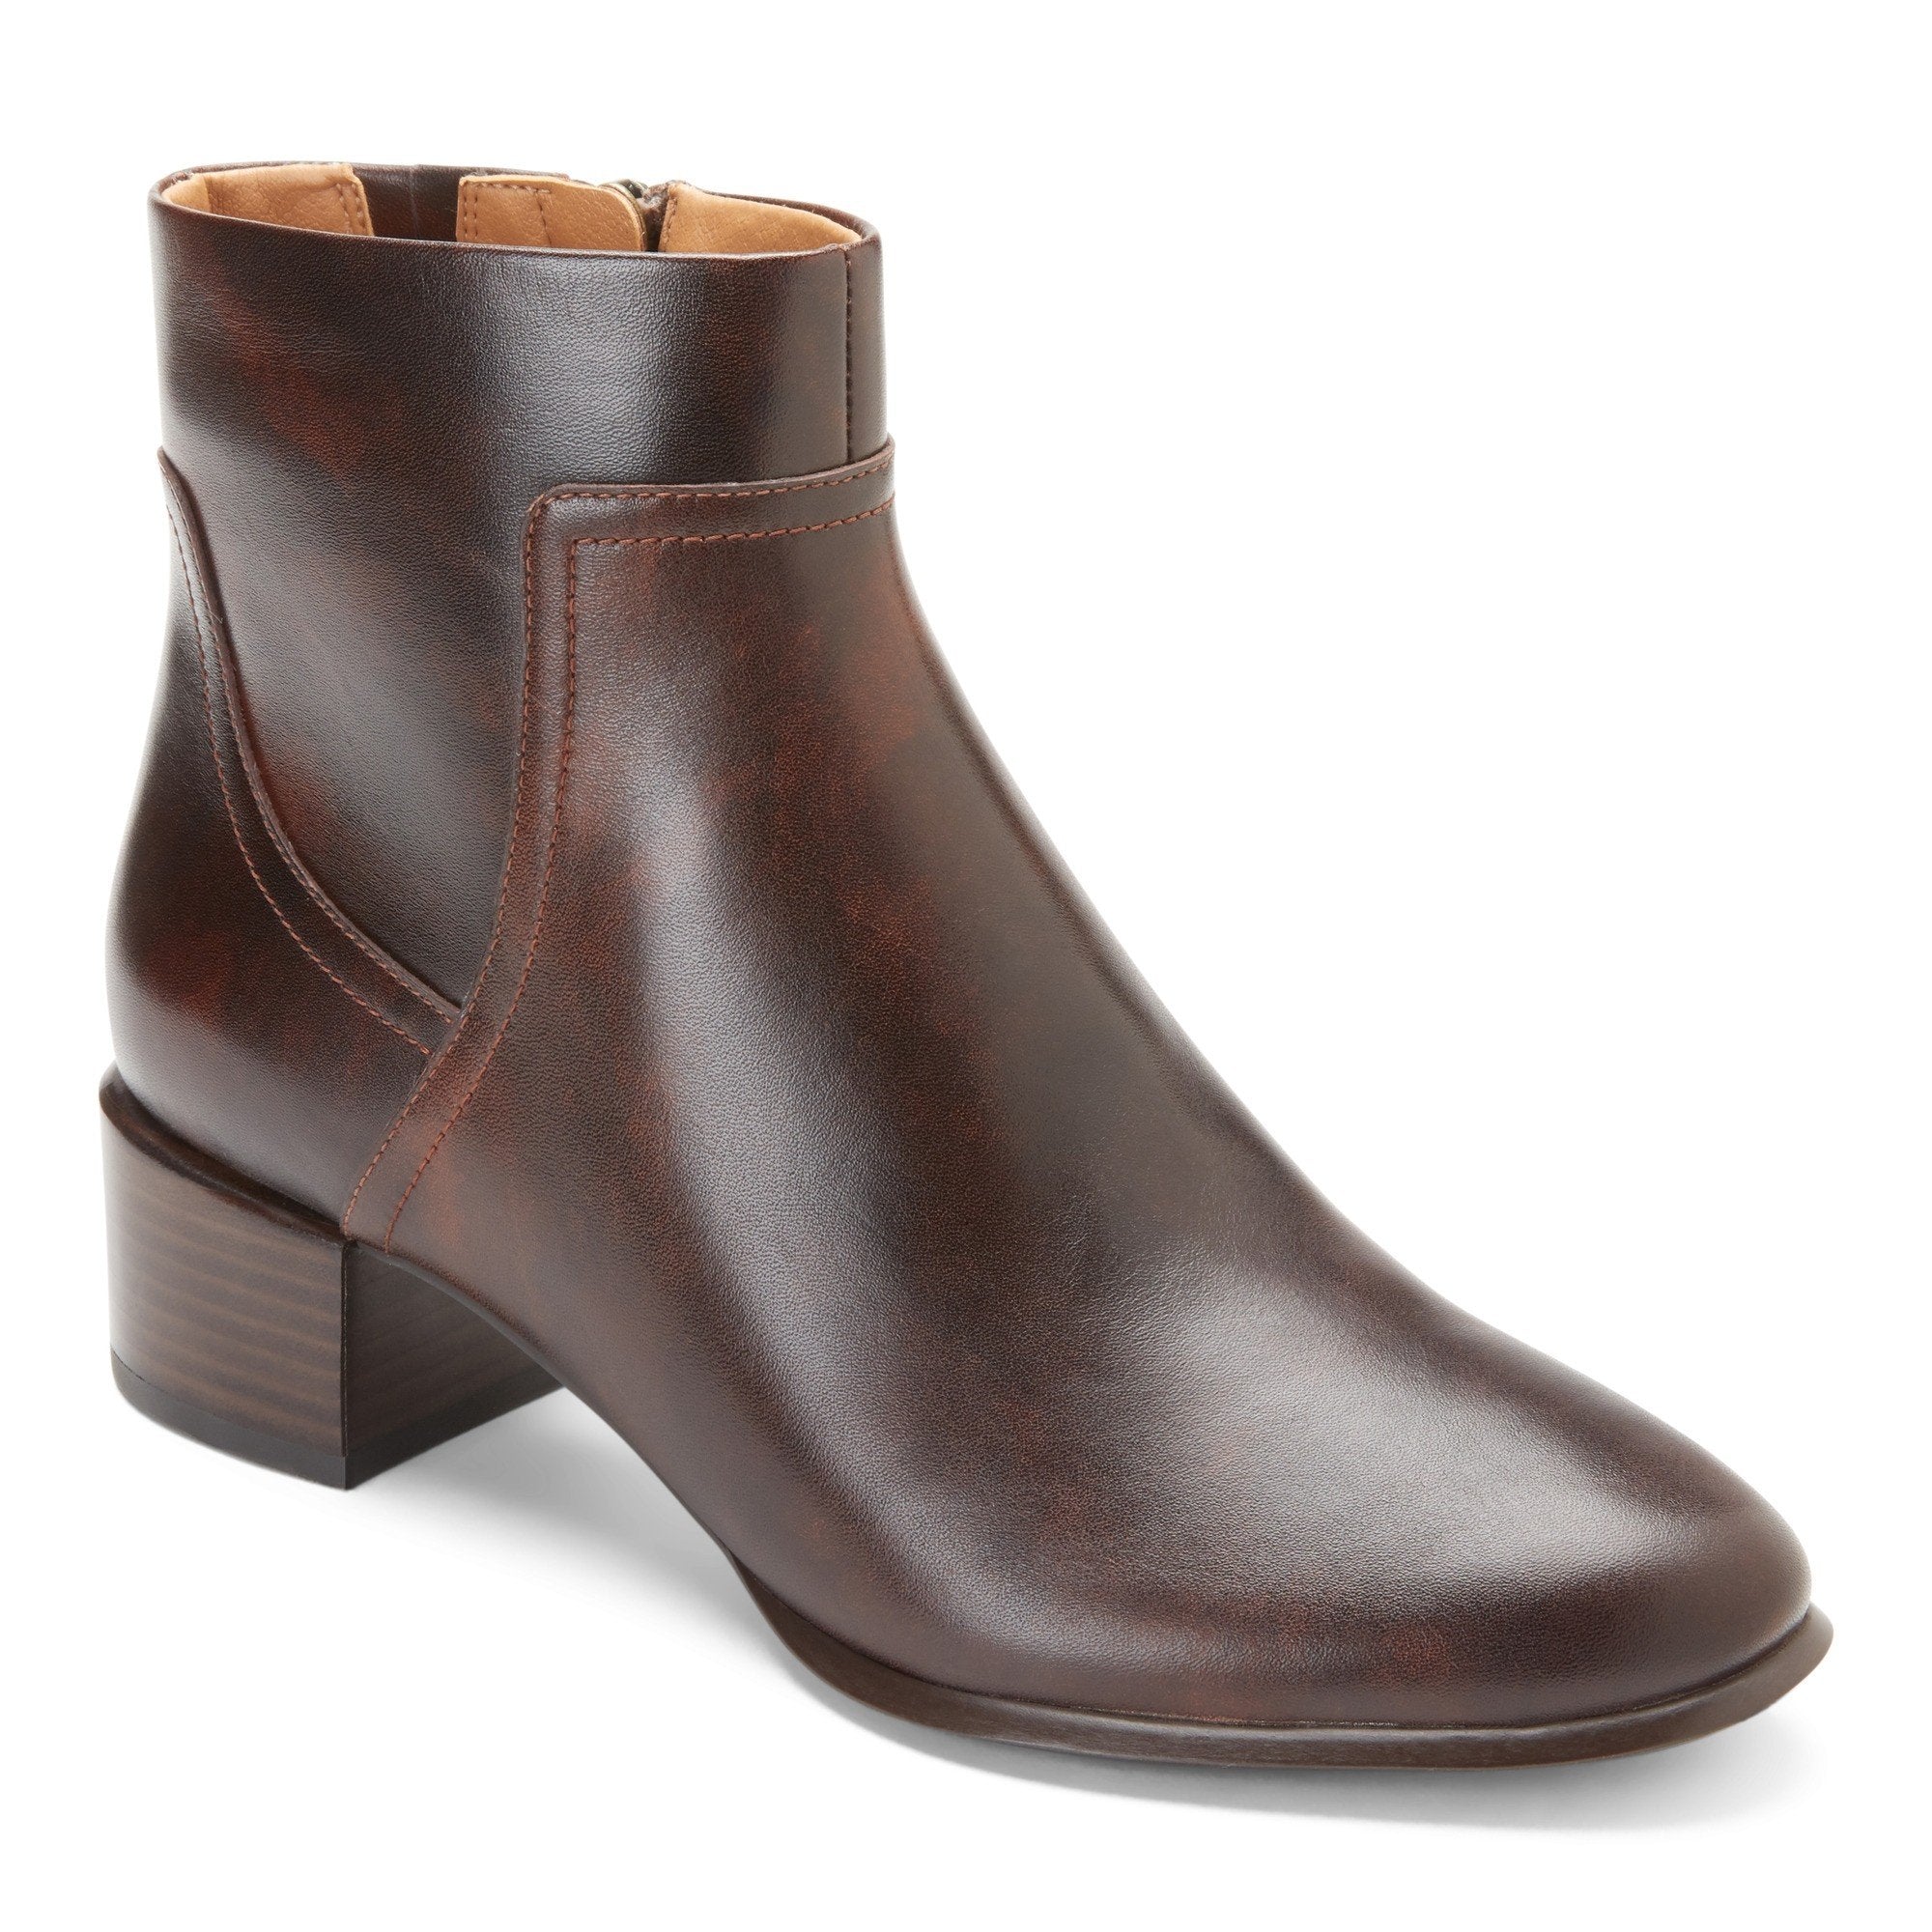 Chocolate Waterproof Ankle Boot by Vionic